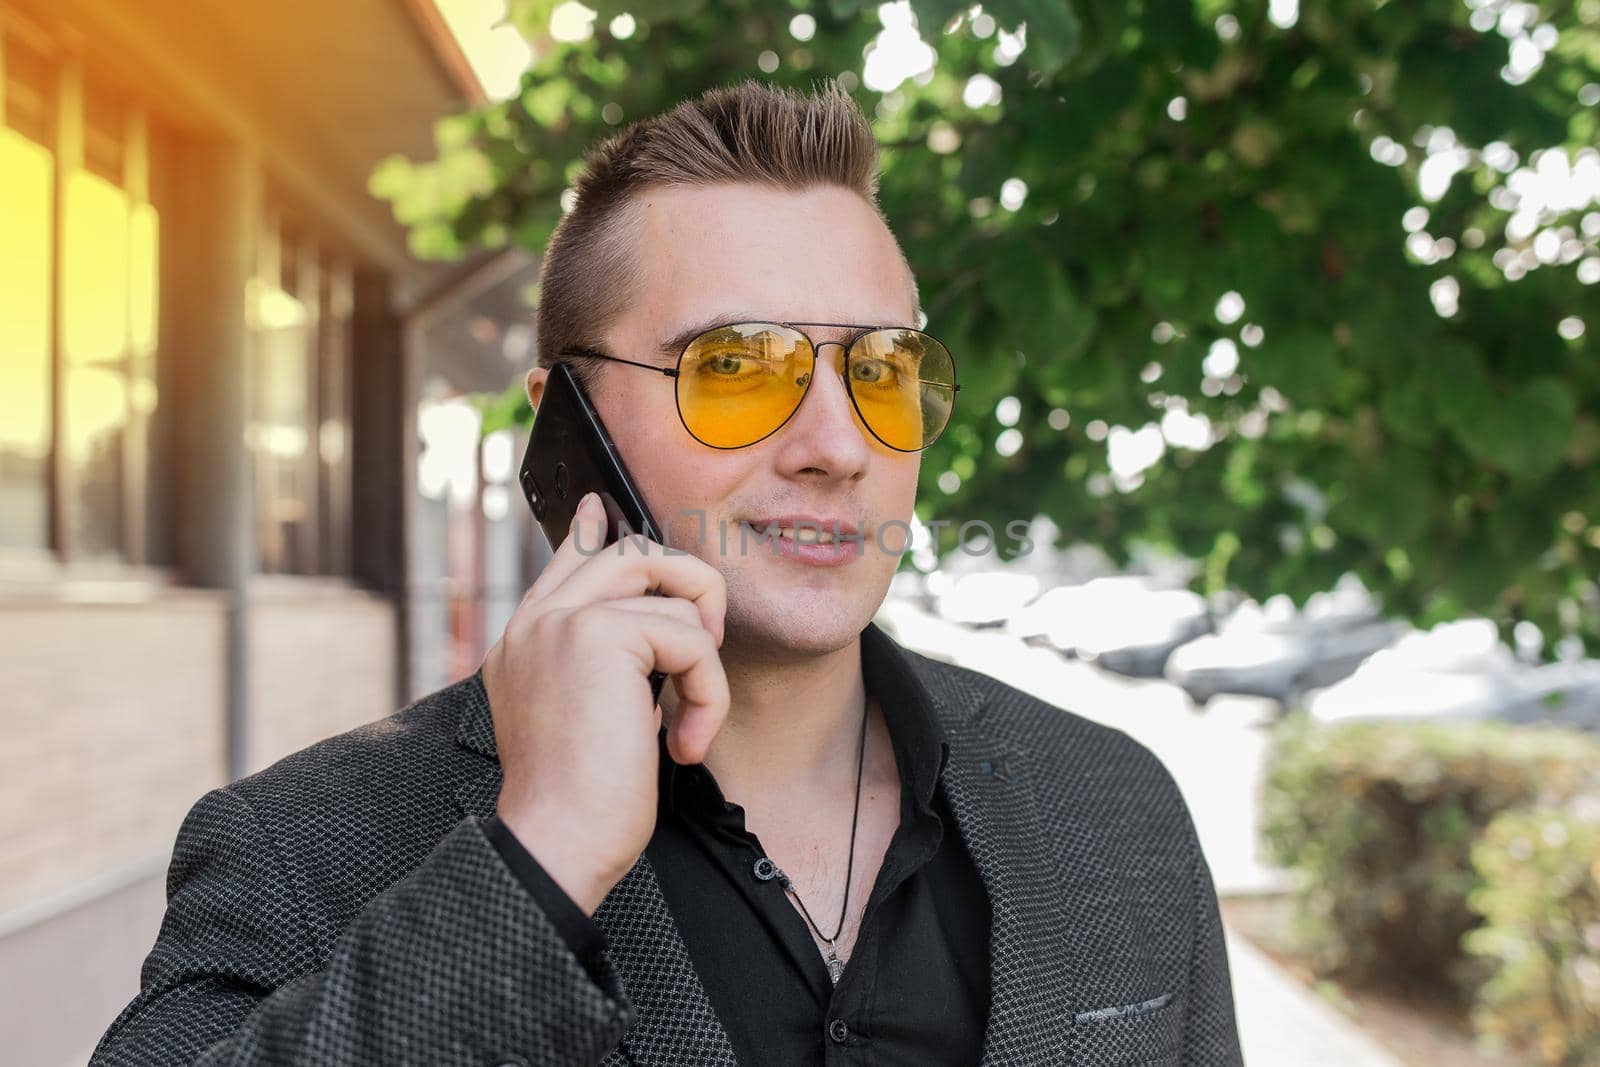 Stylish young positive businessman of attractive European appearance in sunglasses, jacket and shirt, talking on a mobile phone on the outdoor street.